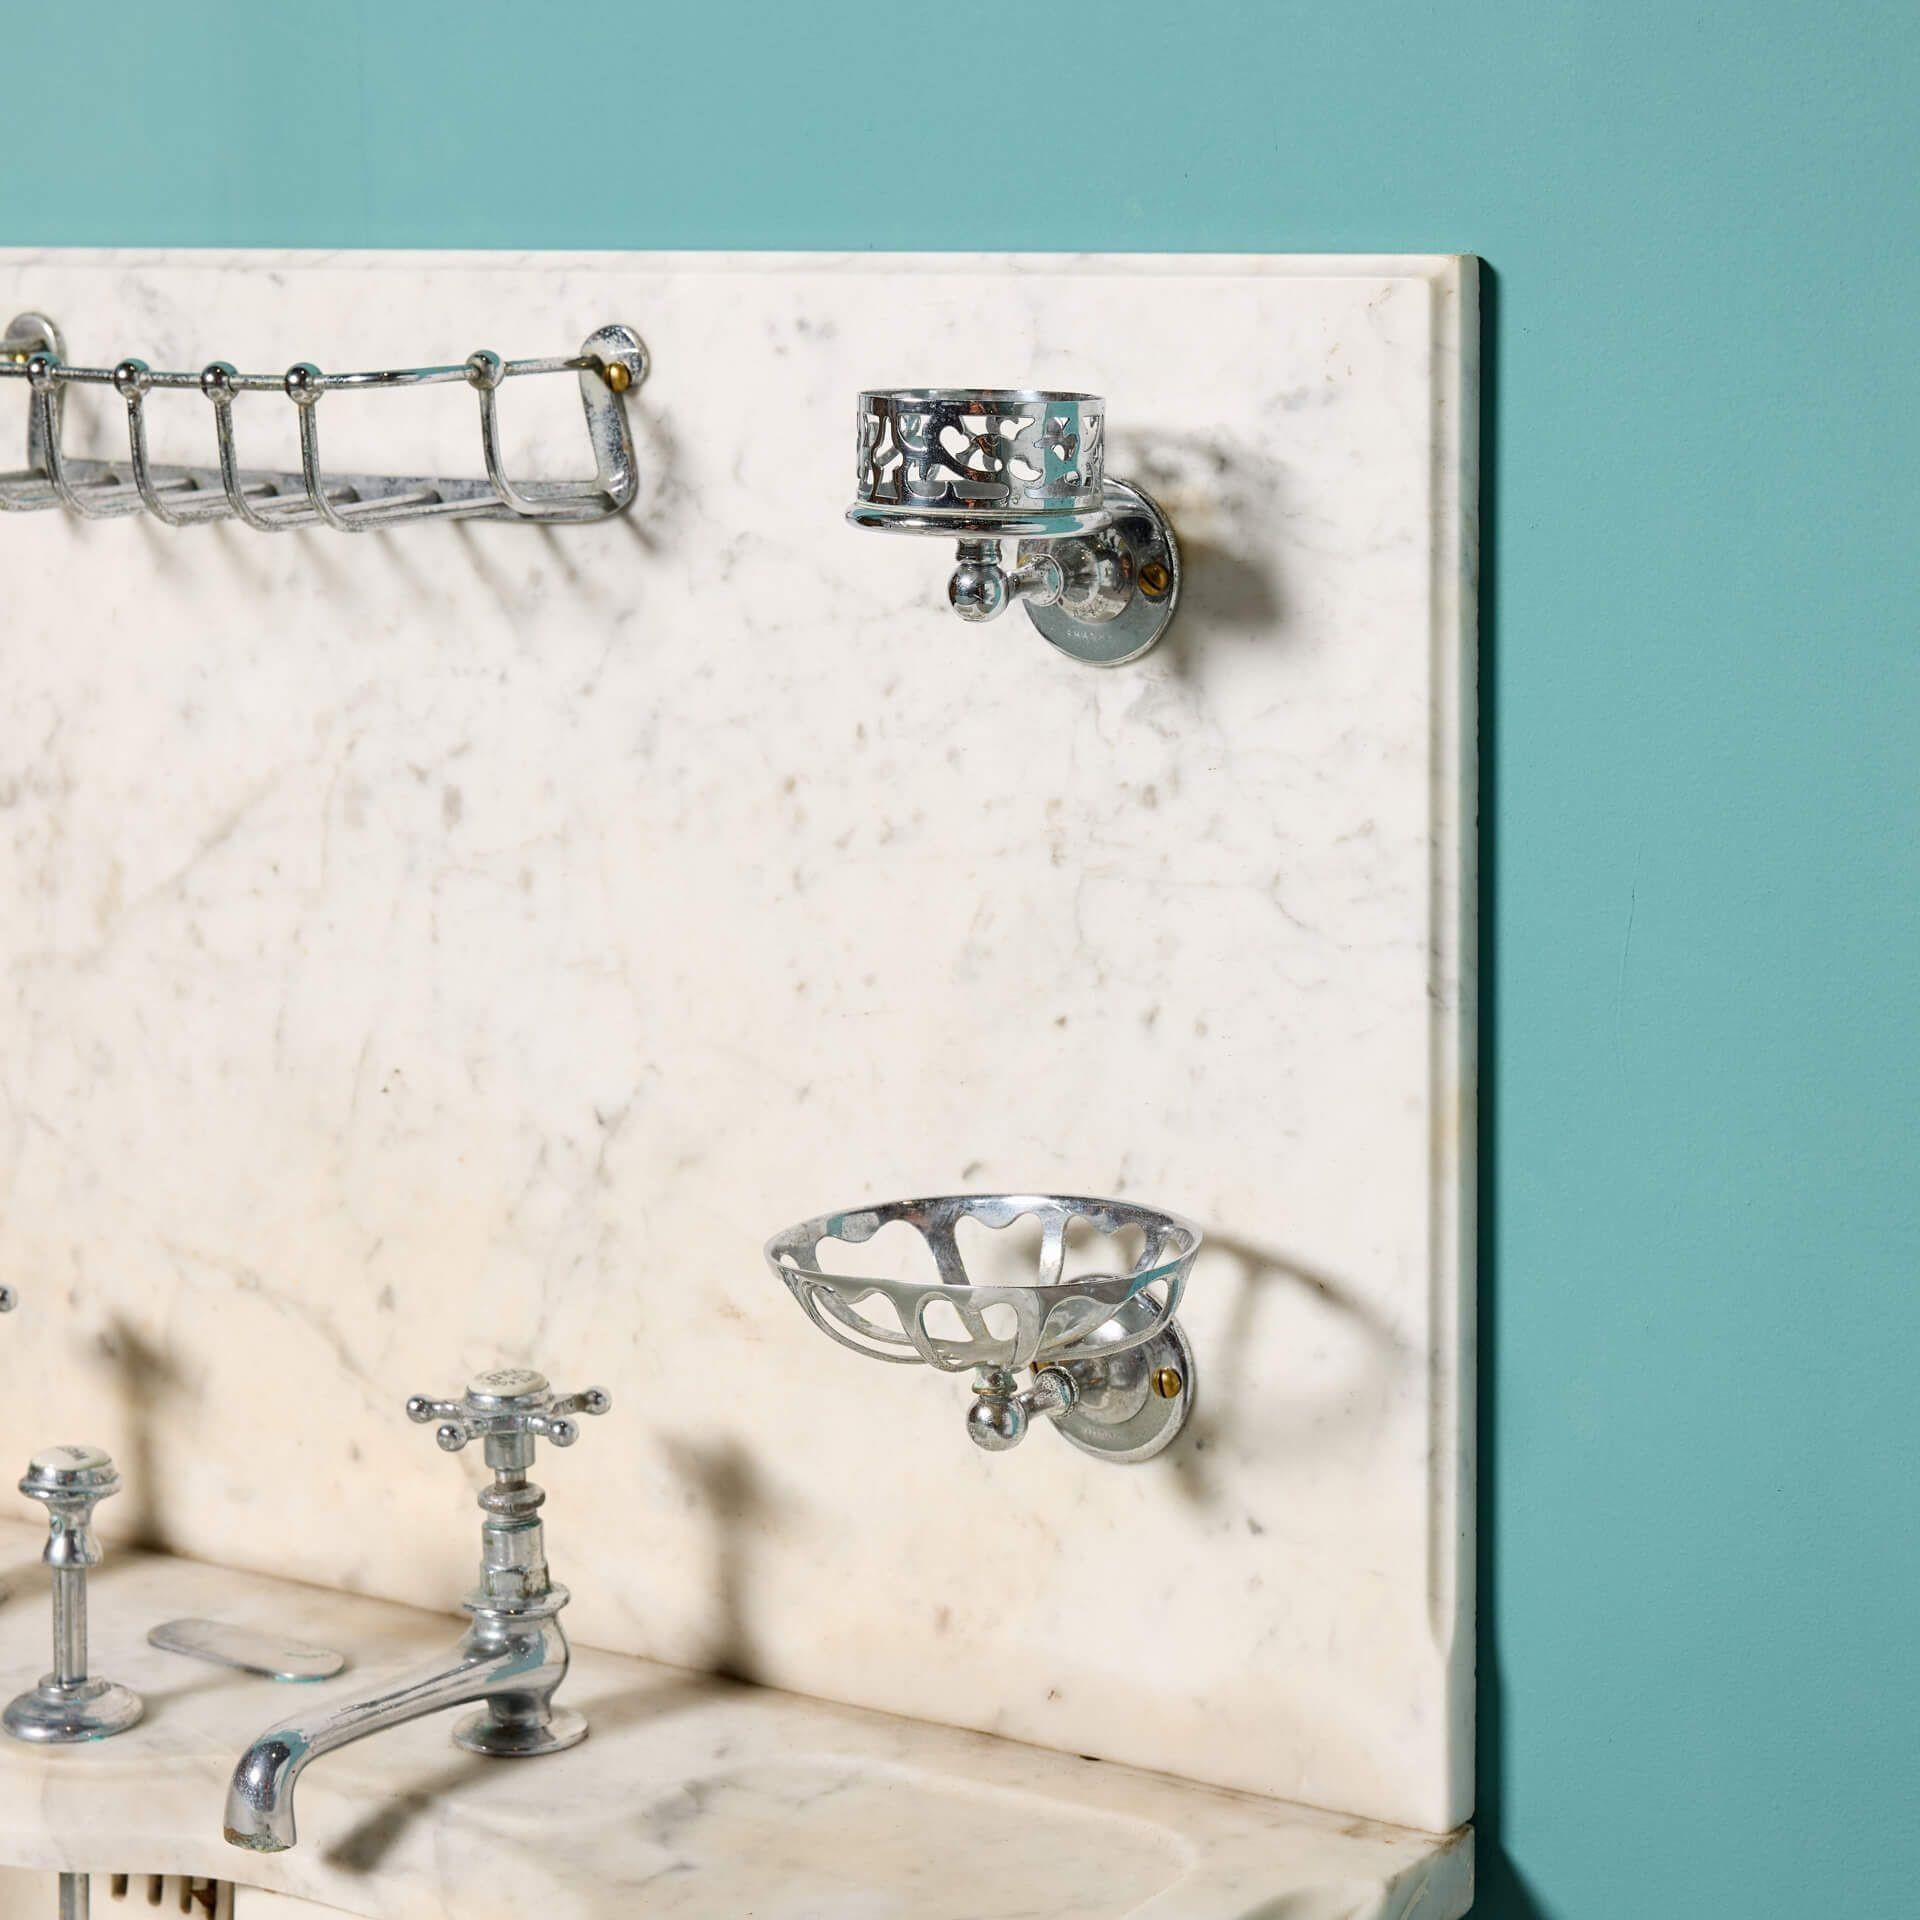 20th Century Antique Shanks Carrara Marble Sink For Sale